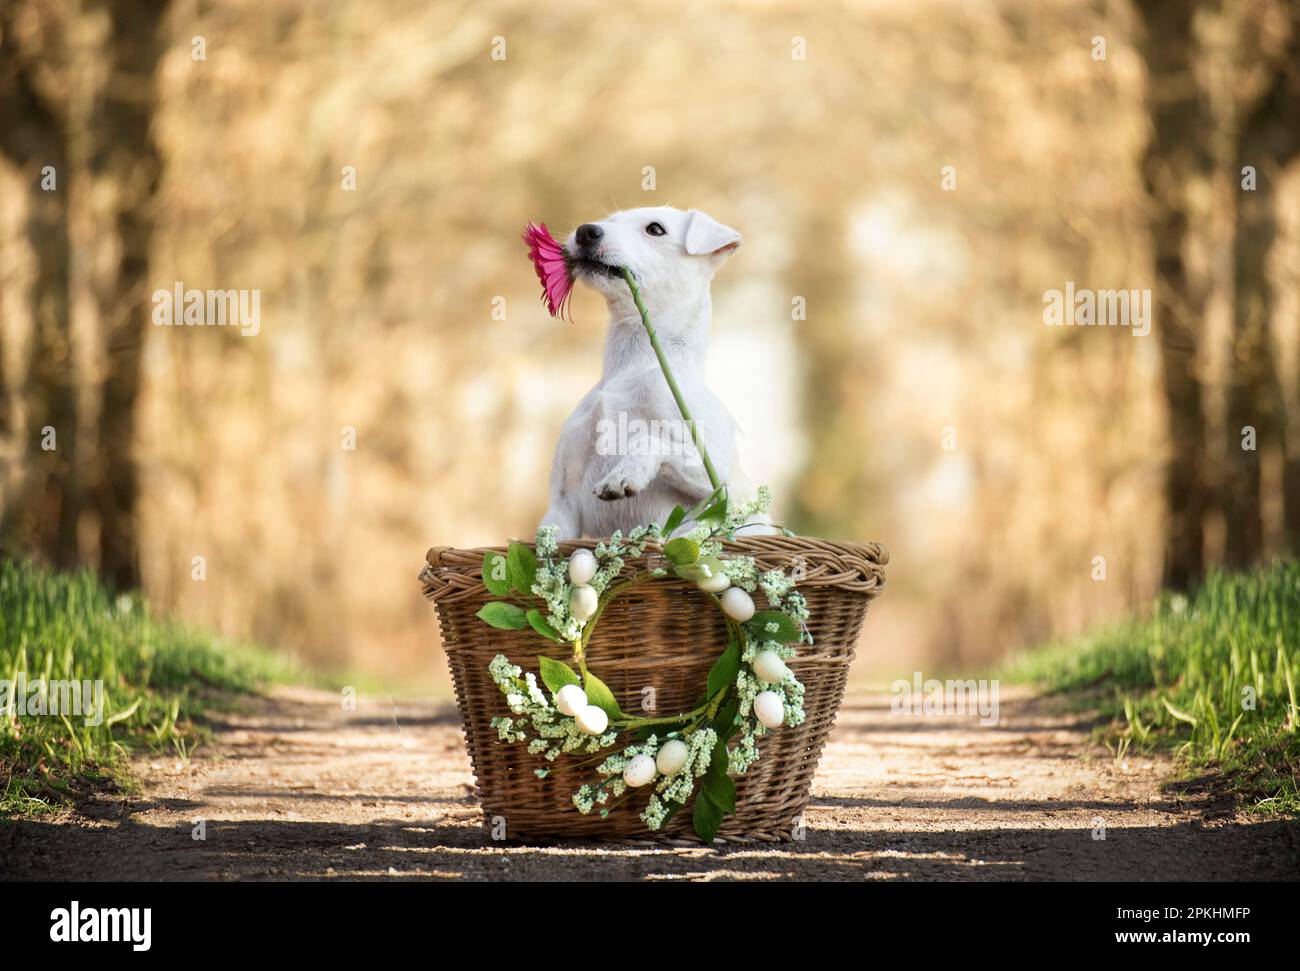 Dog sitting in a basket with a pink gerbera. Easter holidays symbol of spring. Patterdale terrier. Stock Photo